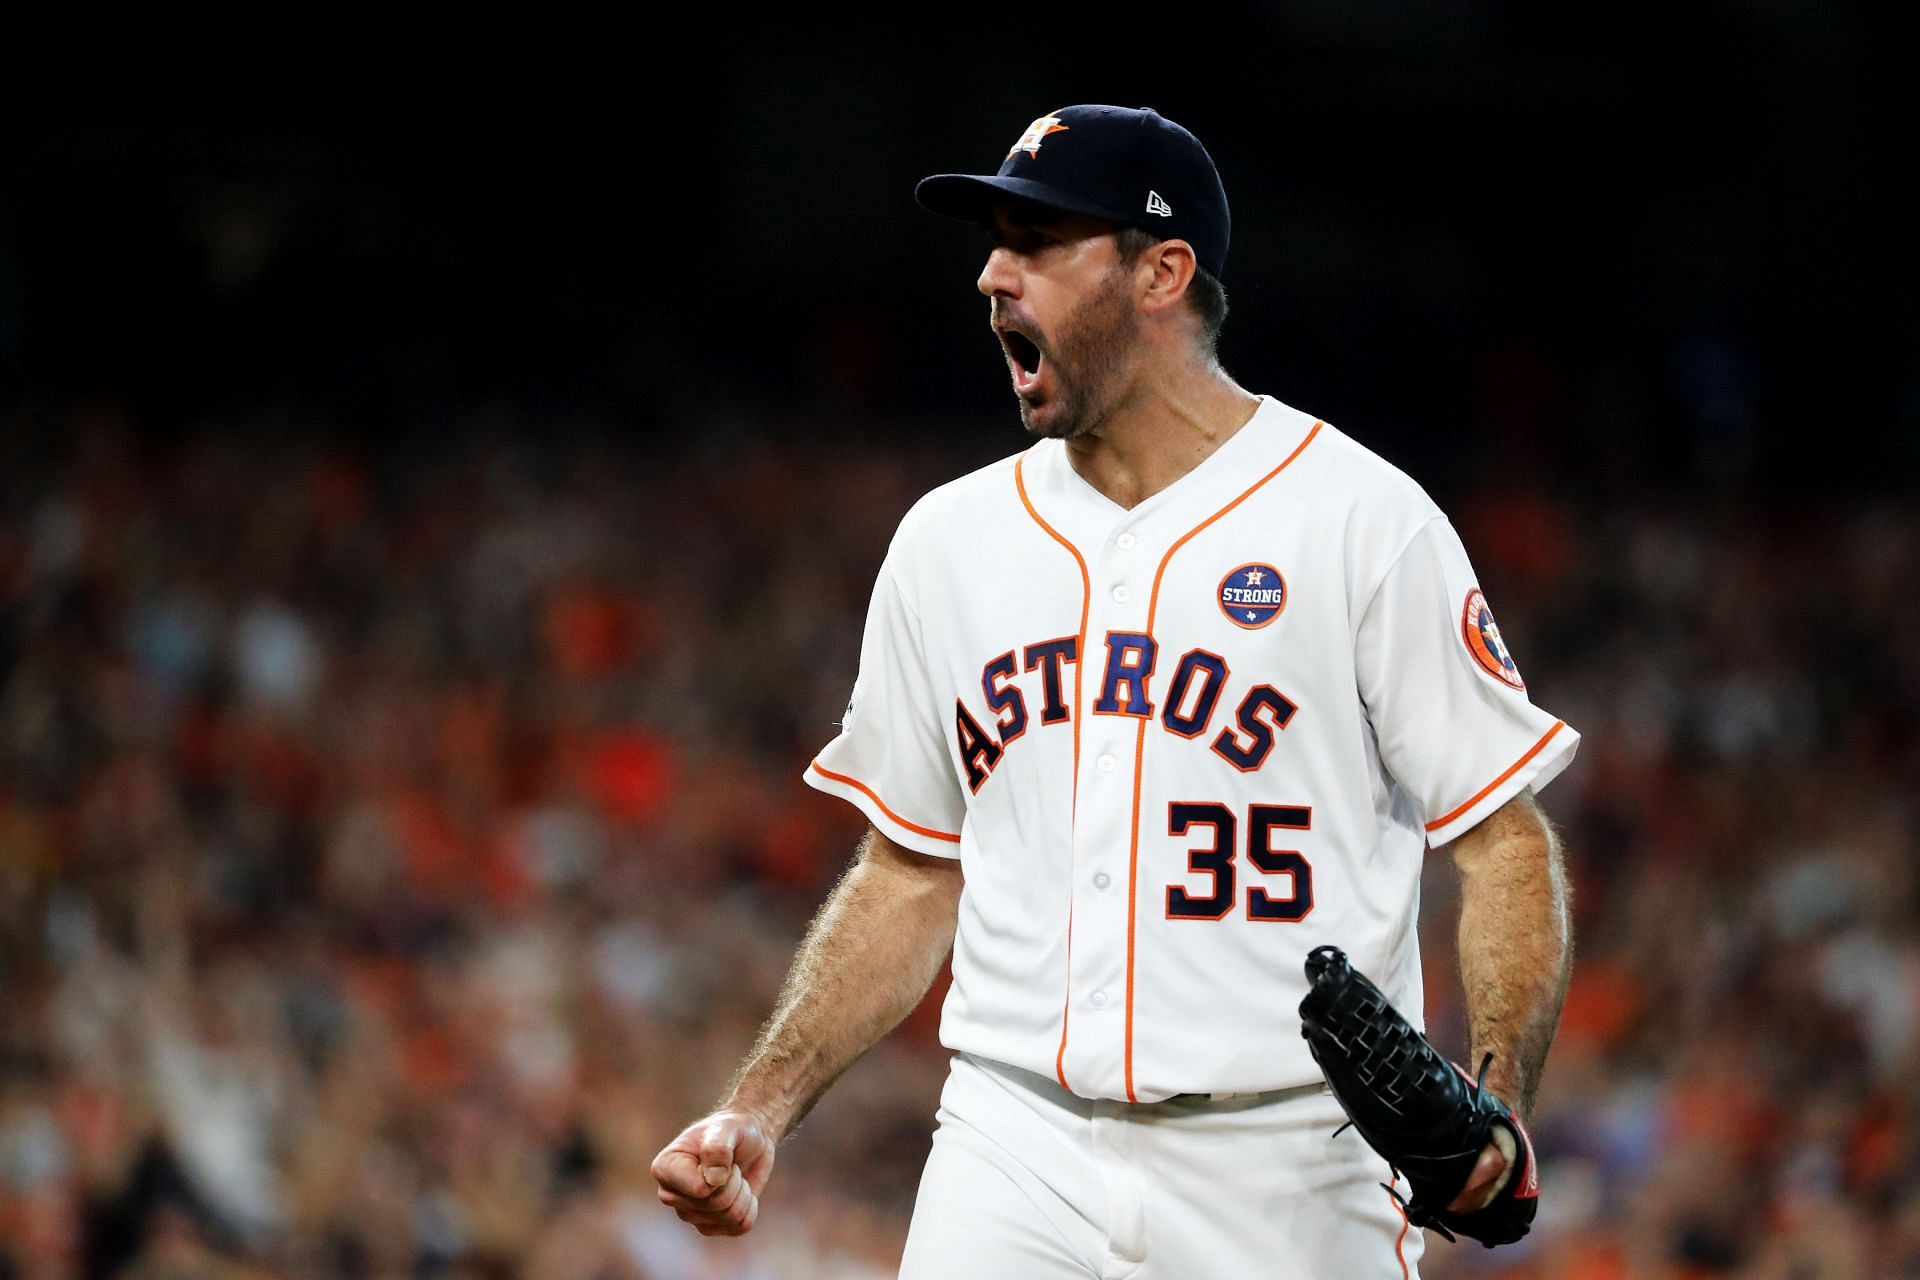 Justin Verlander has made a lasting impression and is a vital part of the Houston Astros&rsquo; recent years success. He has received the Cy Young three times and is a two-time World Series champion.